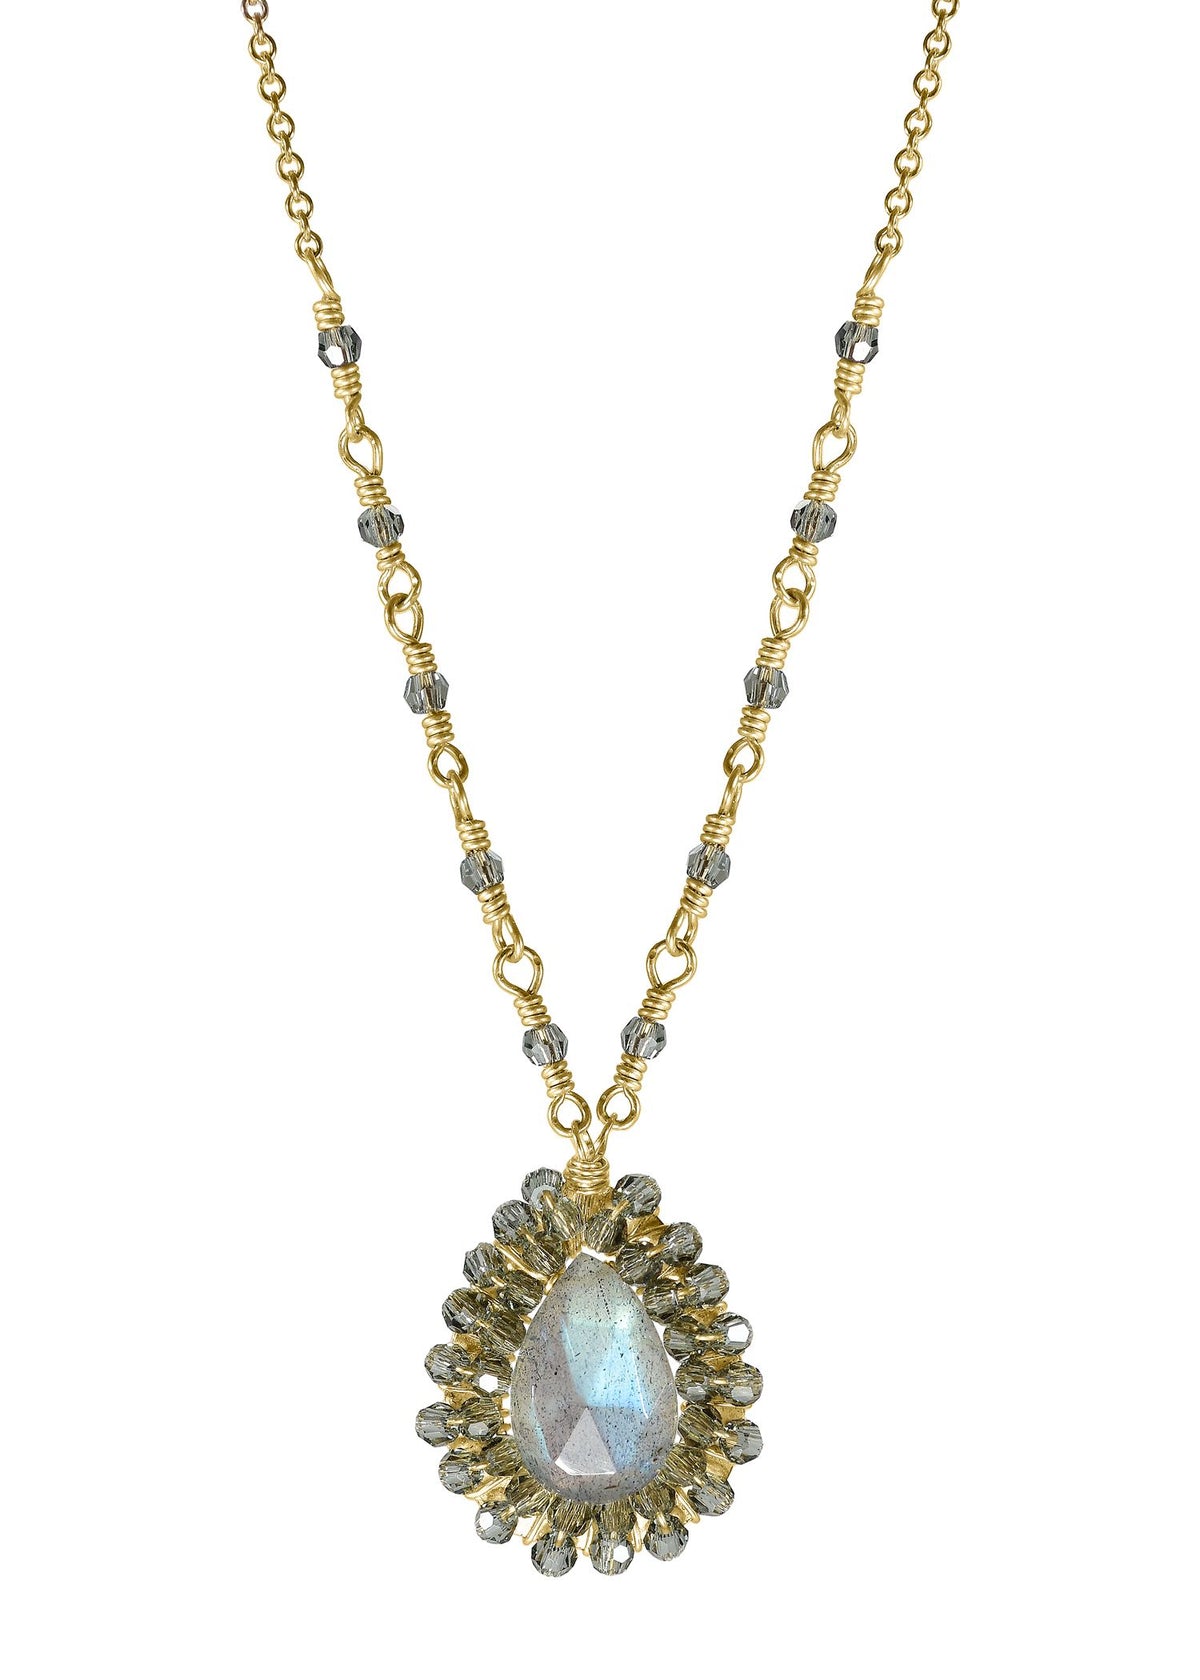 Labradorite Crystal 14k gold fill Necklace measures 16-3/4” in length Pendant measures 11/16” in length and 9/16” in width Handmade in our Los Angeles studio